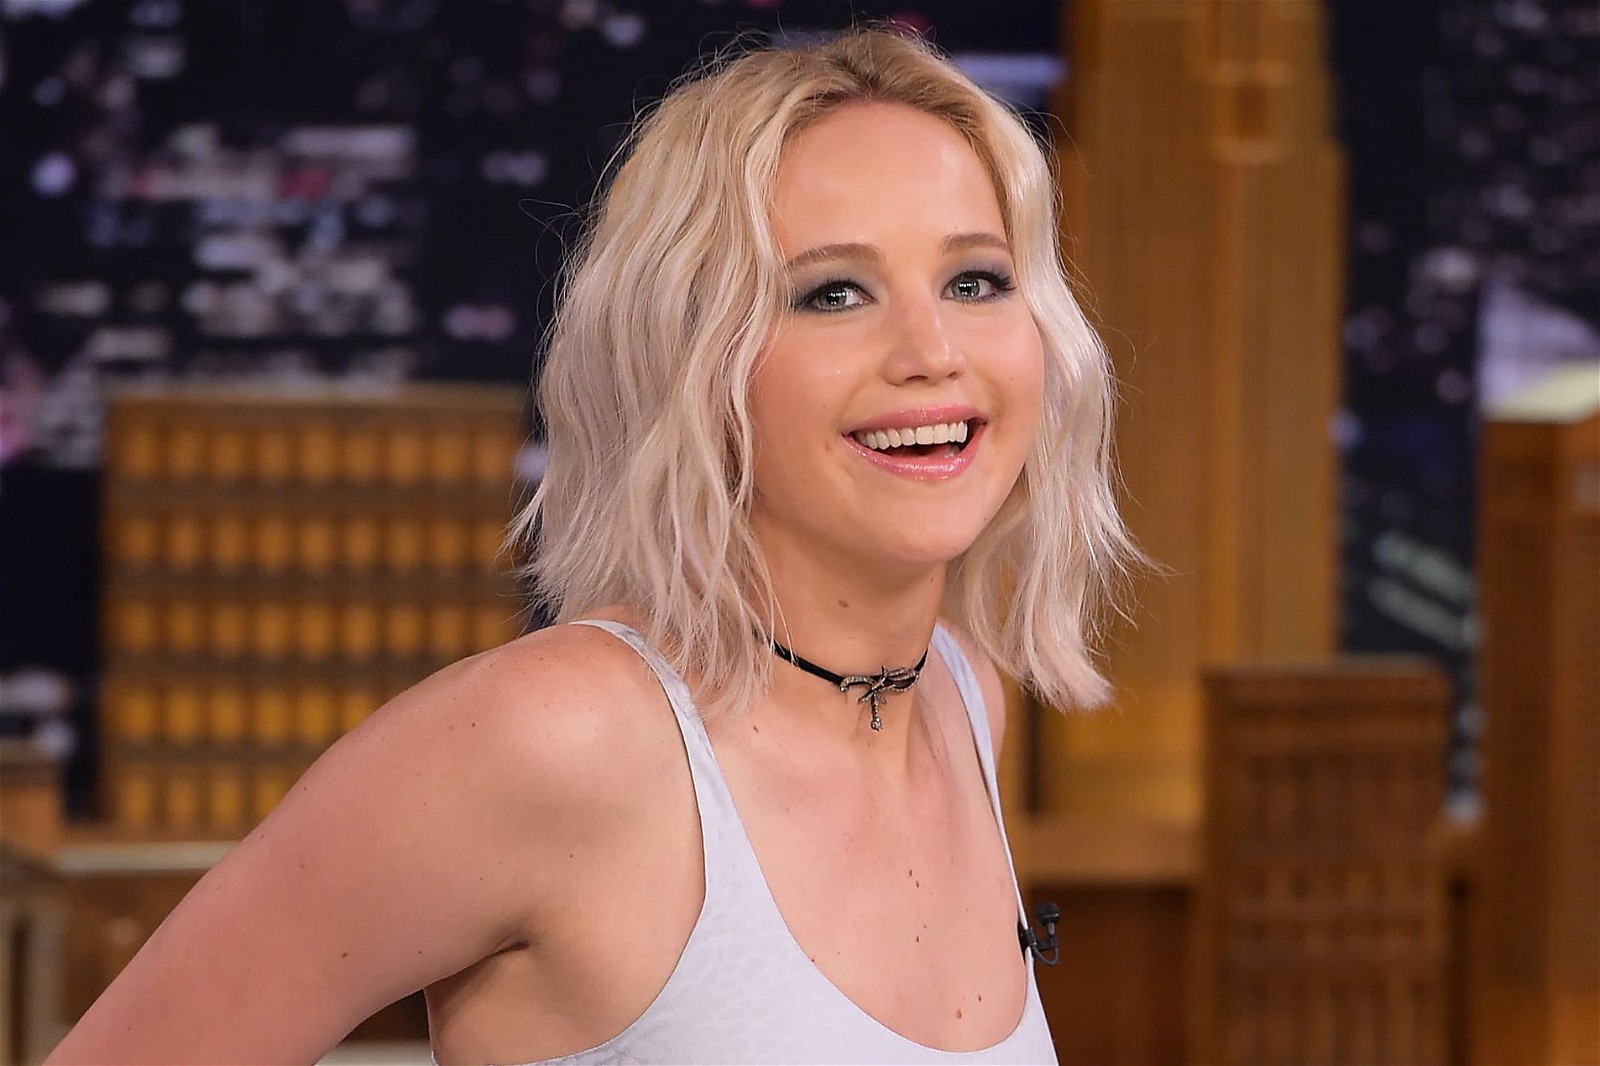 Jennifer Lawrence is renowned for her quirky and witty sense of humor